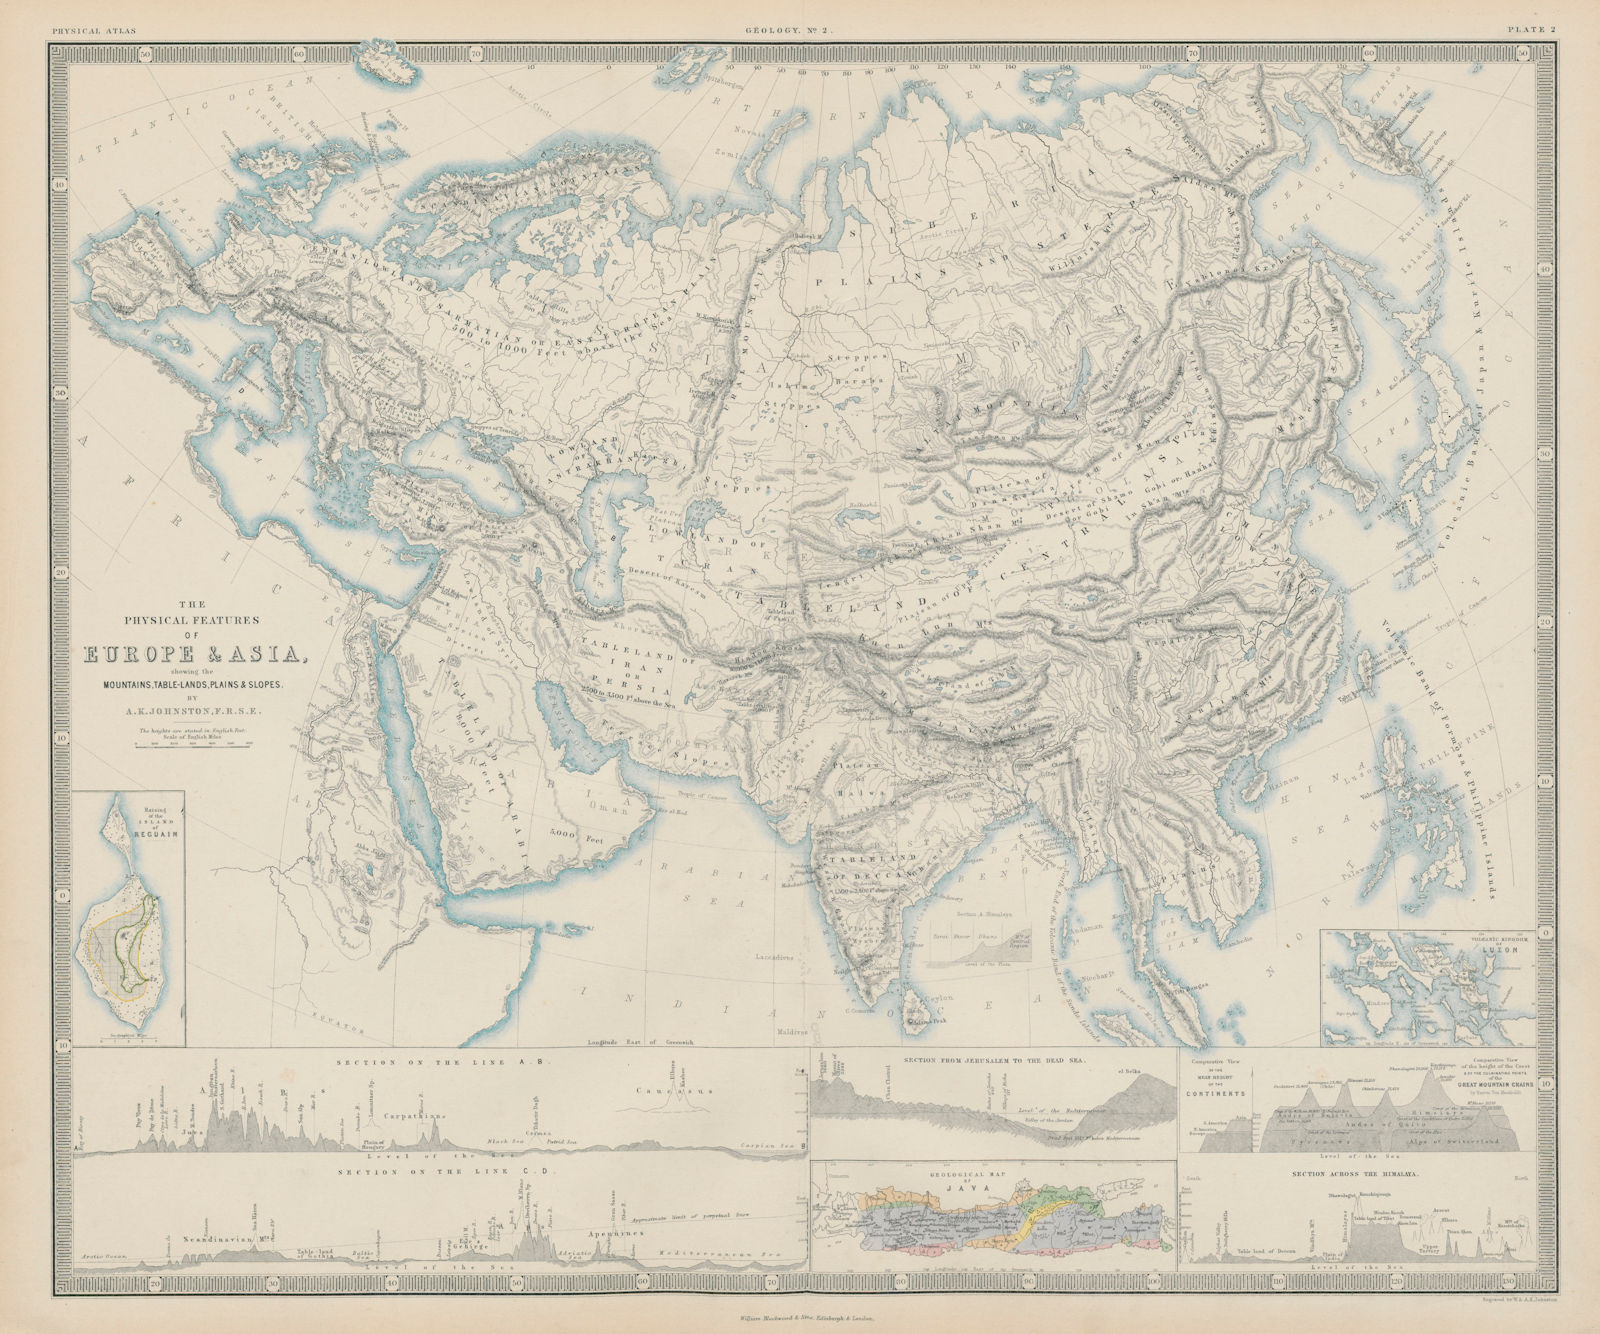 Associate Product The Physical Features of Europe and Asia. Mountains. Rivers. Sections 1856 map